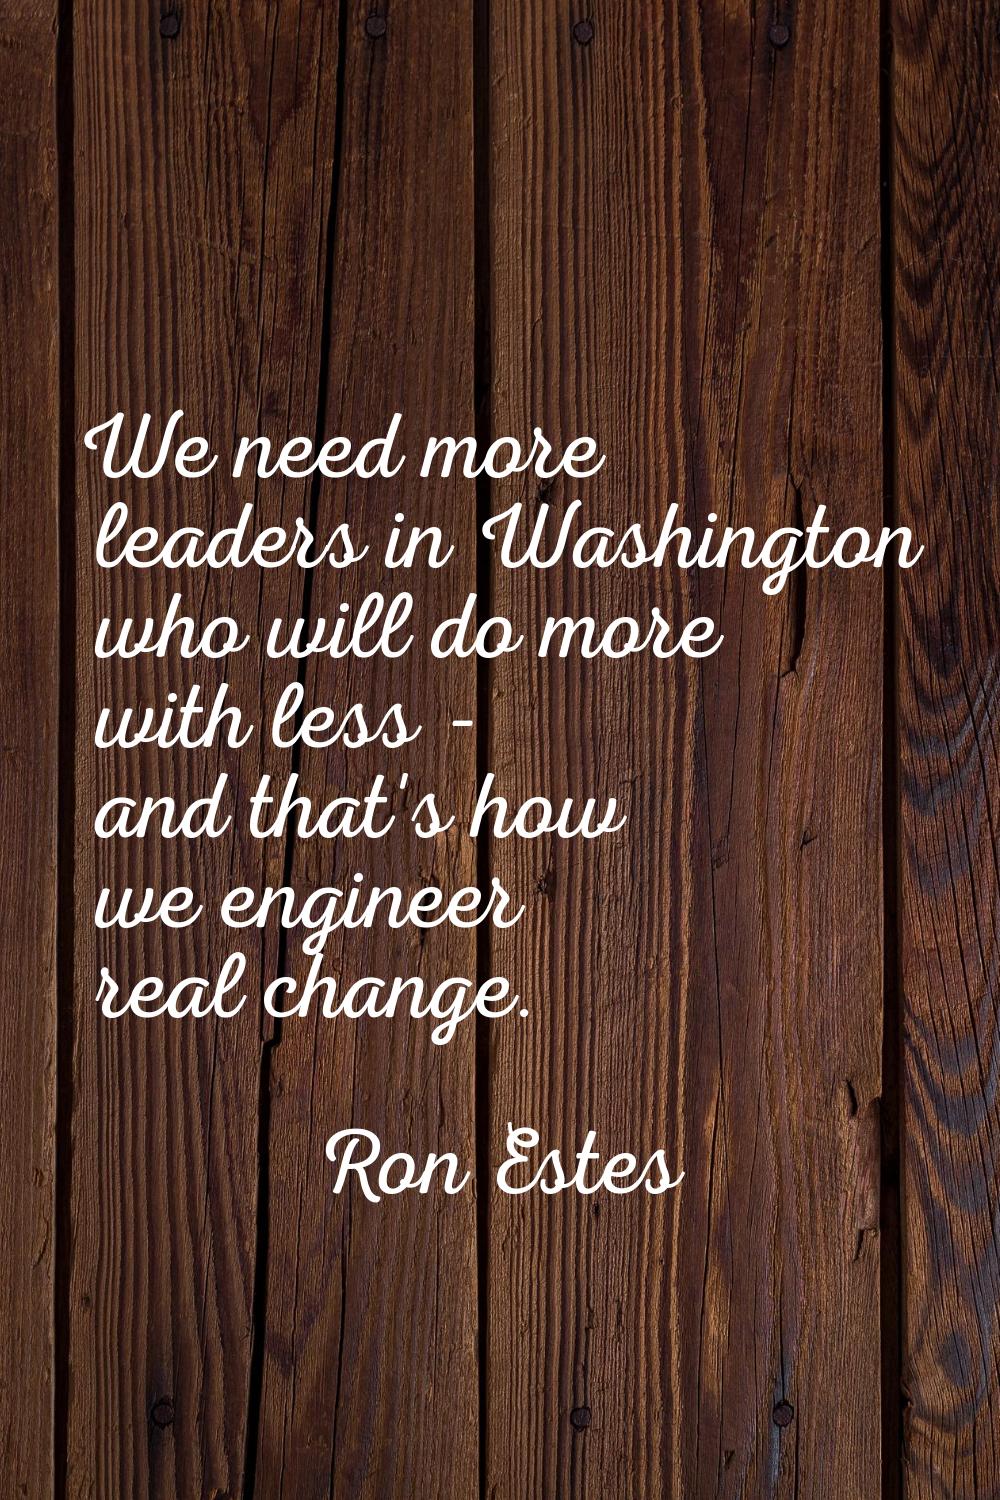 We need more leaders in Washington who will do more with less - and that's how we engineer real cha